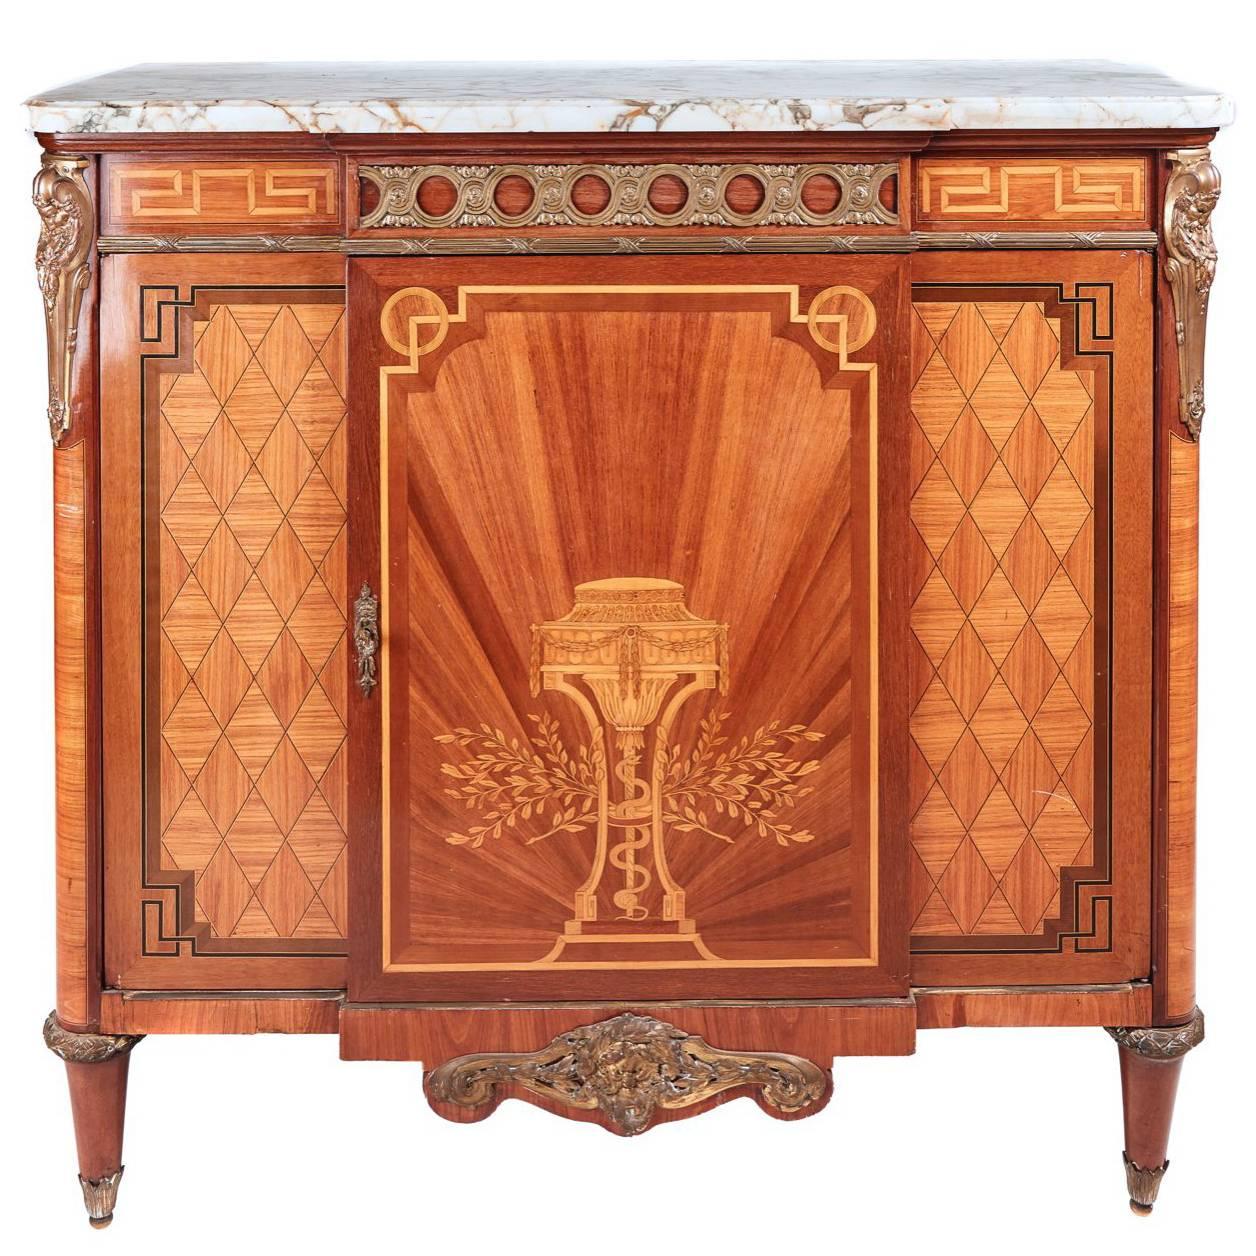 19th Century French Kingwood Marquetry and Parquetry Cabinet